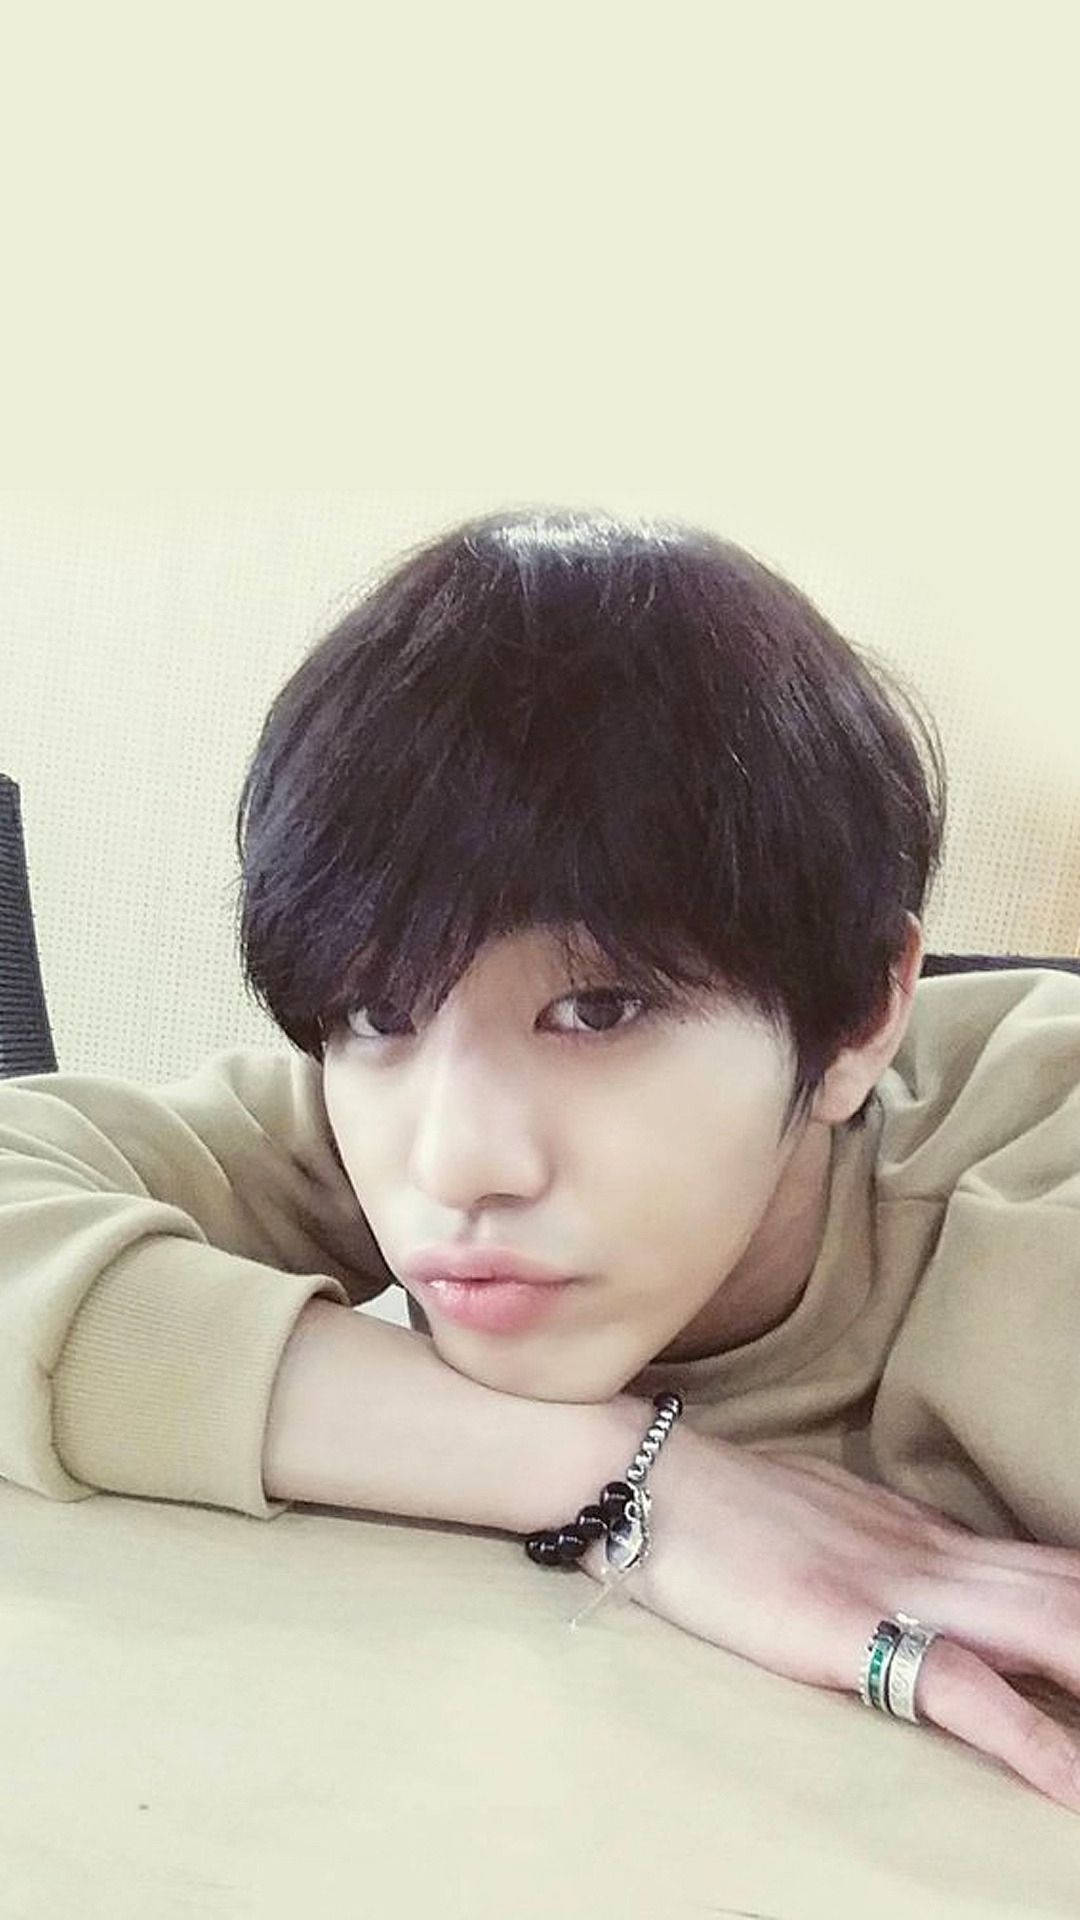 Korean Actor Ahn Hyo Seop Exuding Charm With Pouty Lips